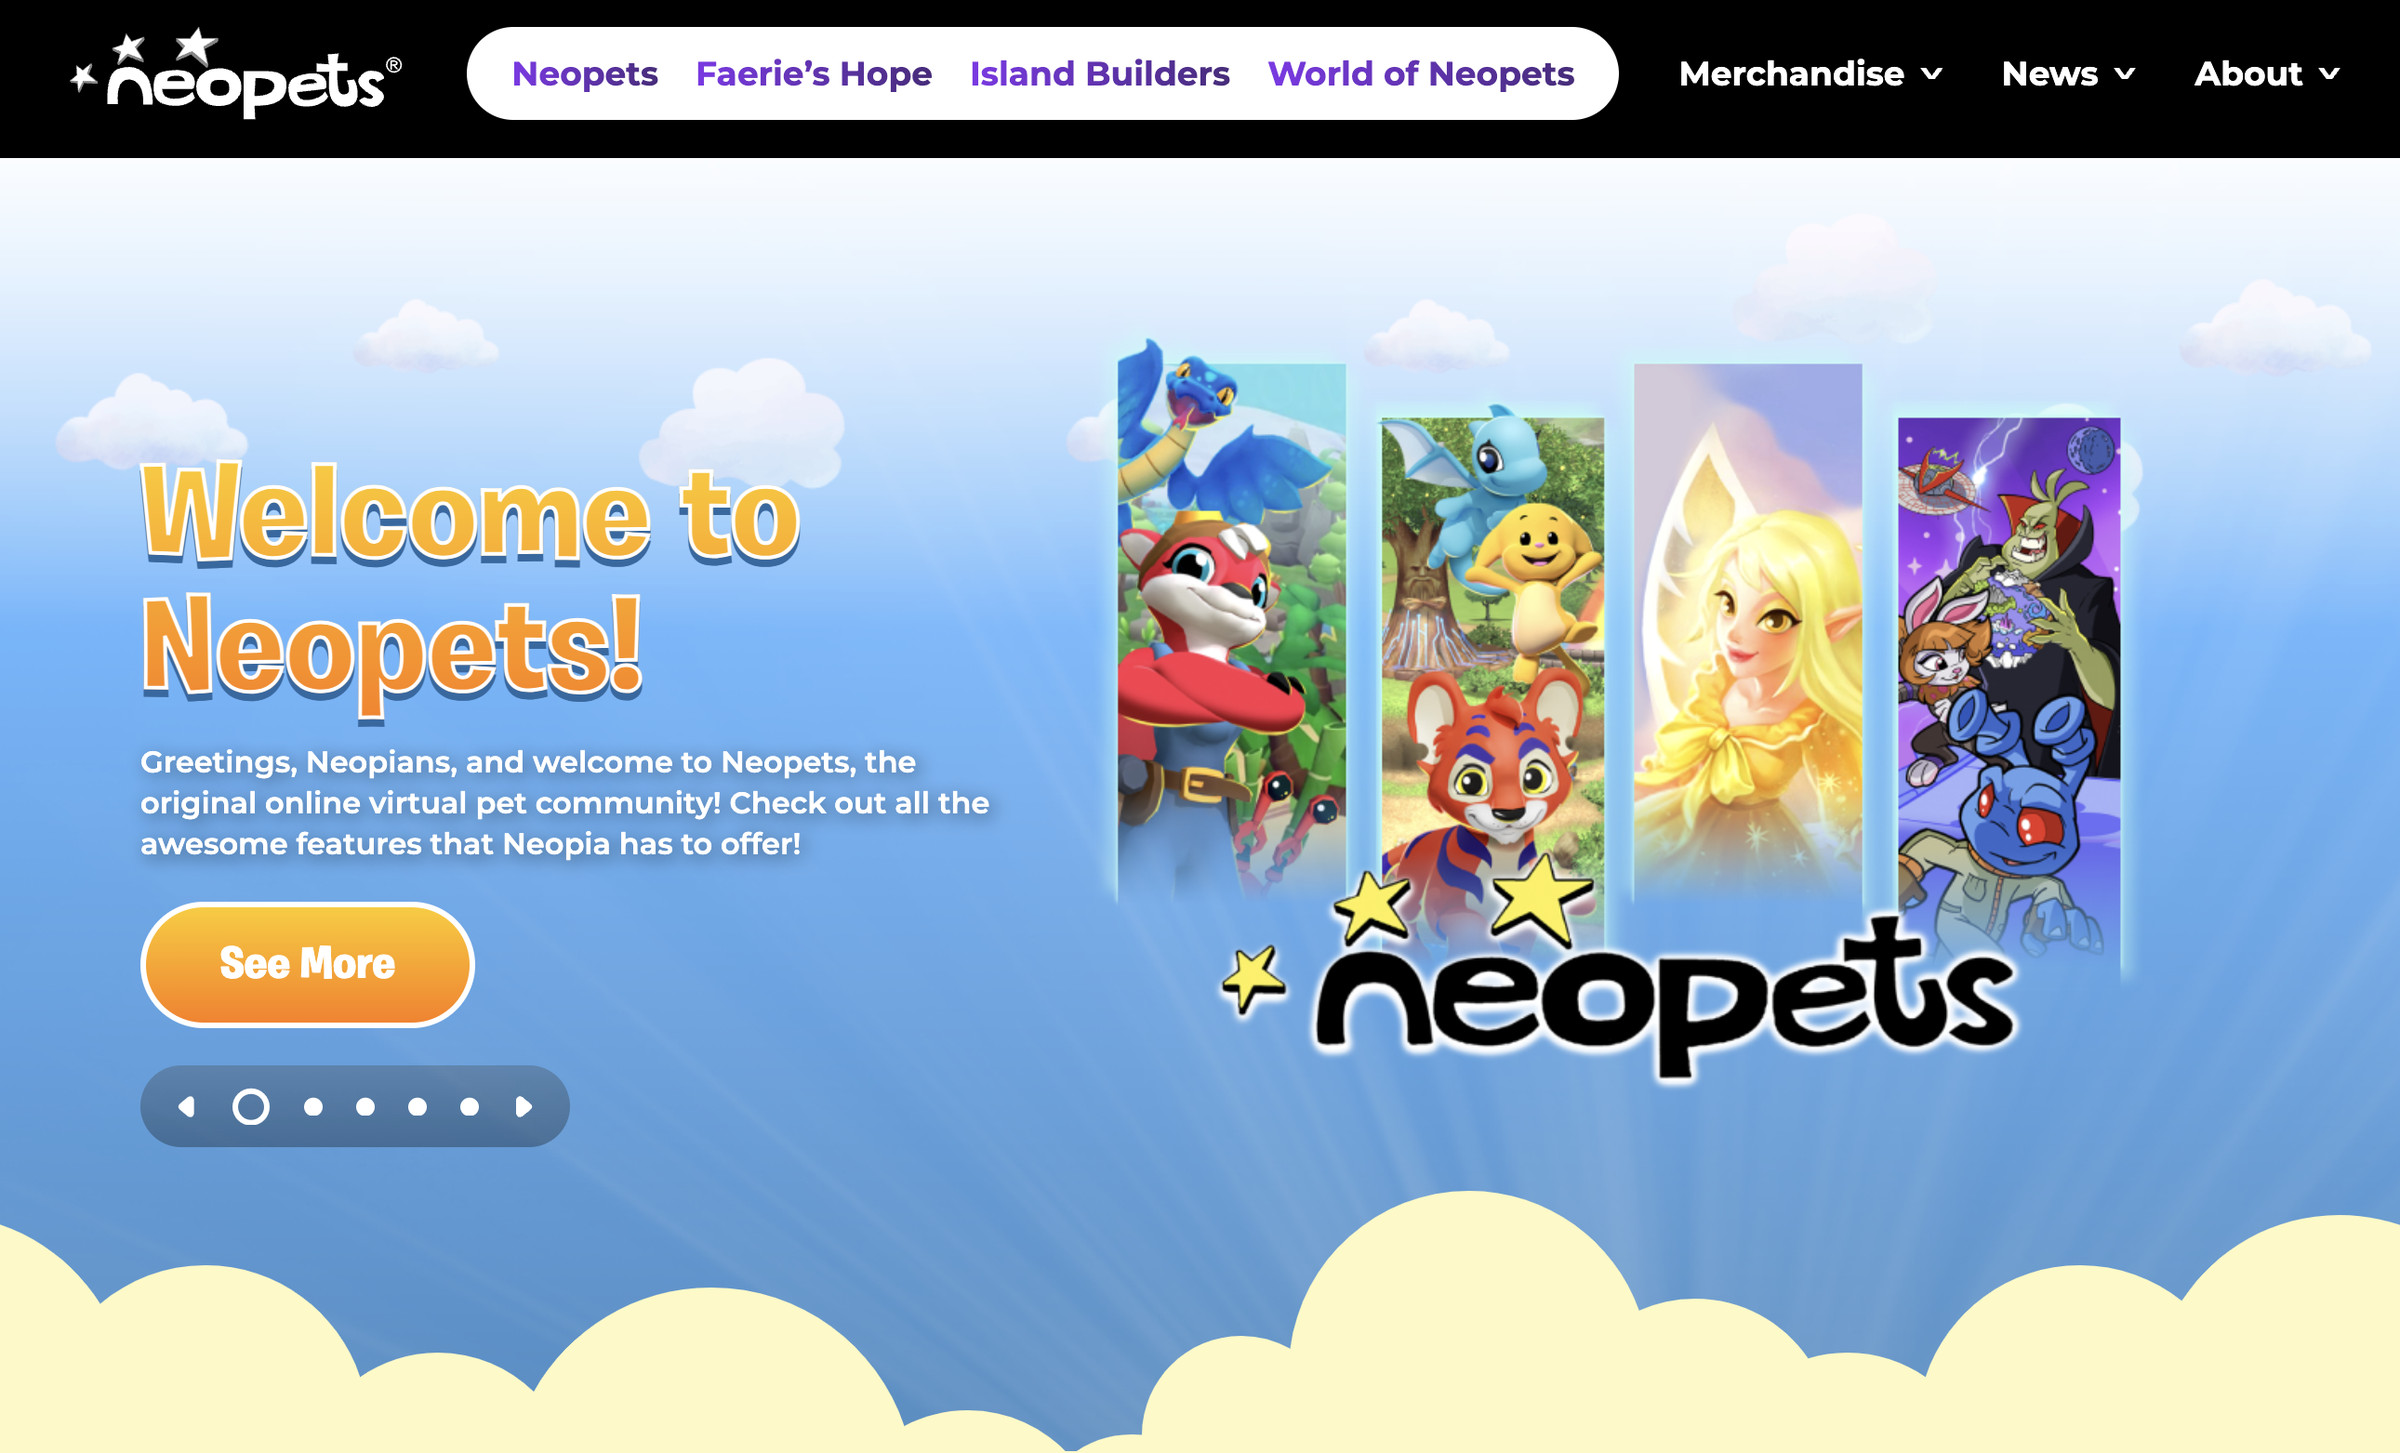 The new Neopets homepage.